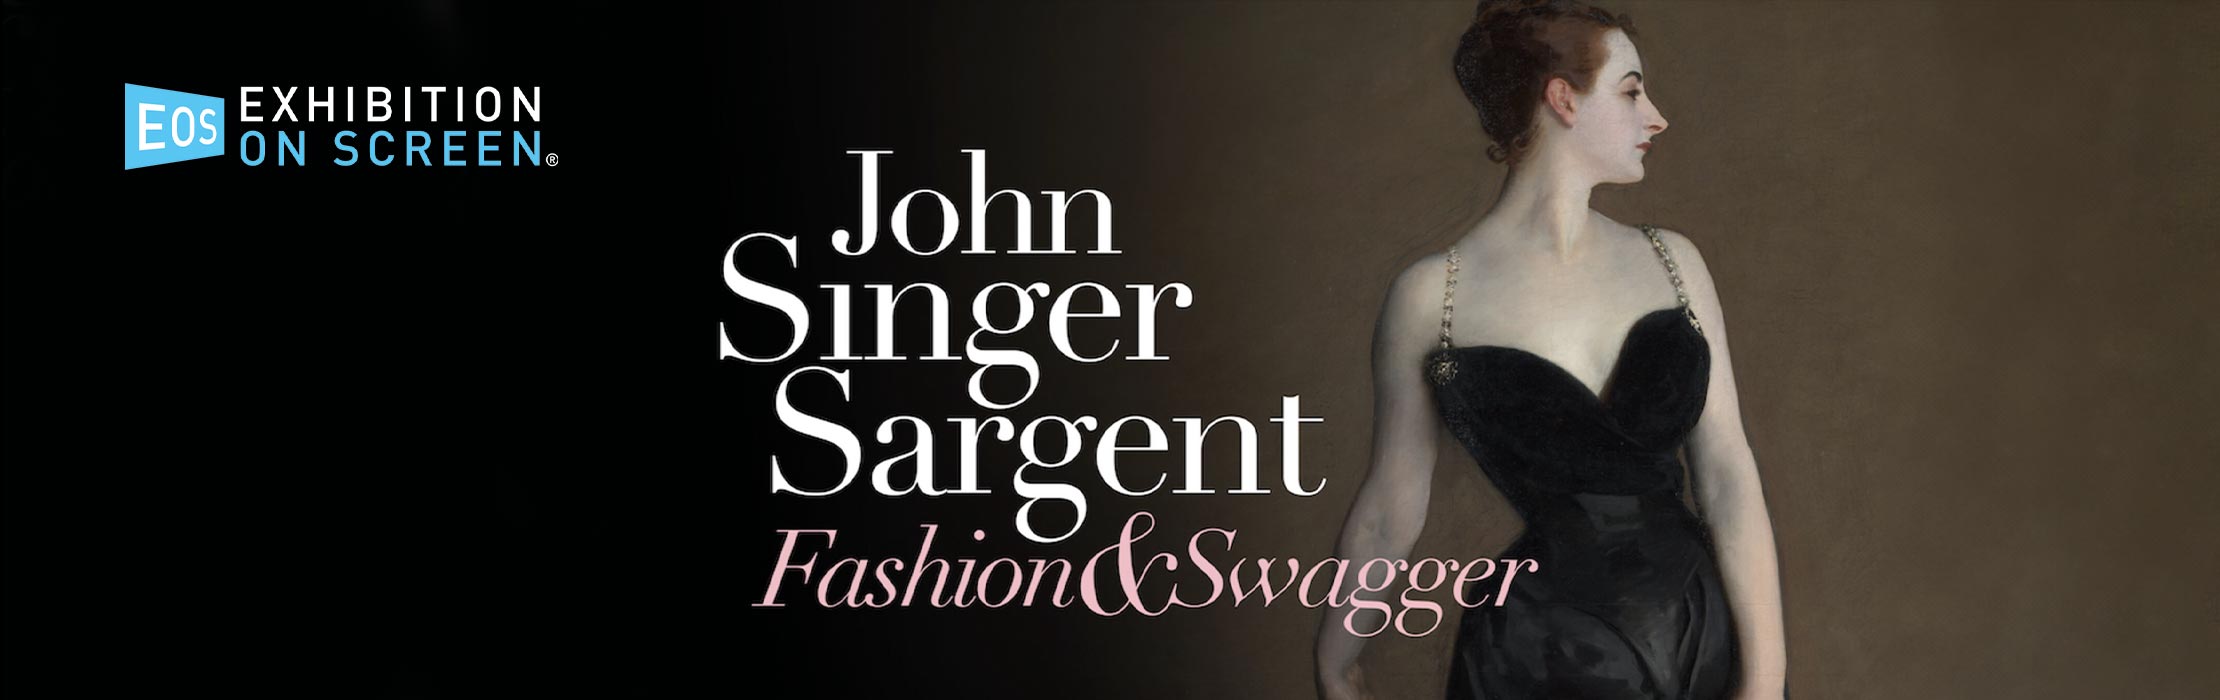 EOS John Singer Sargent Fashion and Swagger